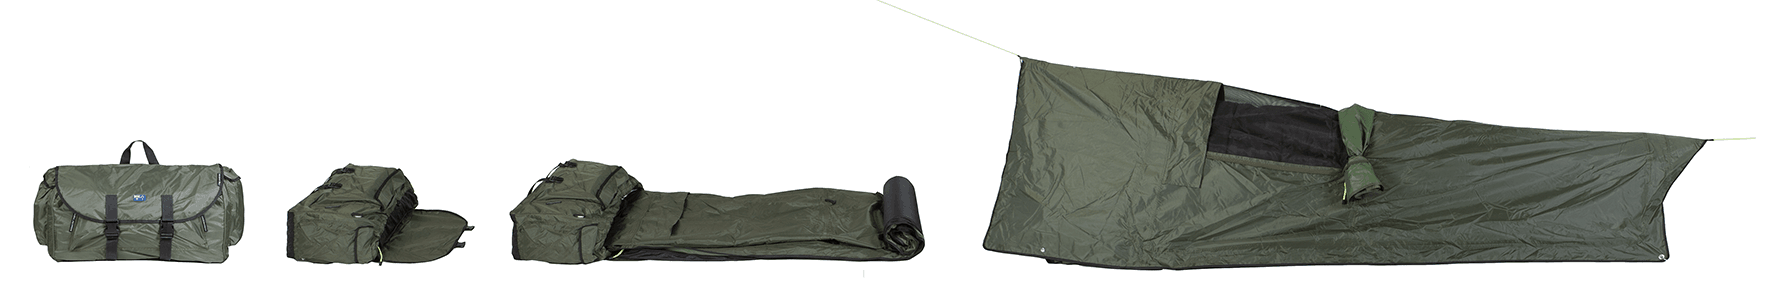 All Weather Backpack Bed horizontal-min